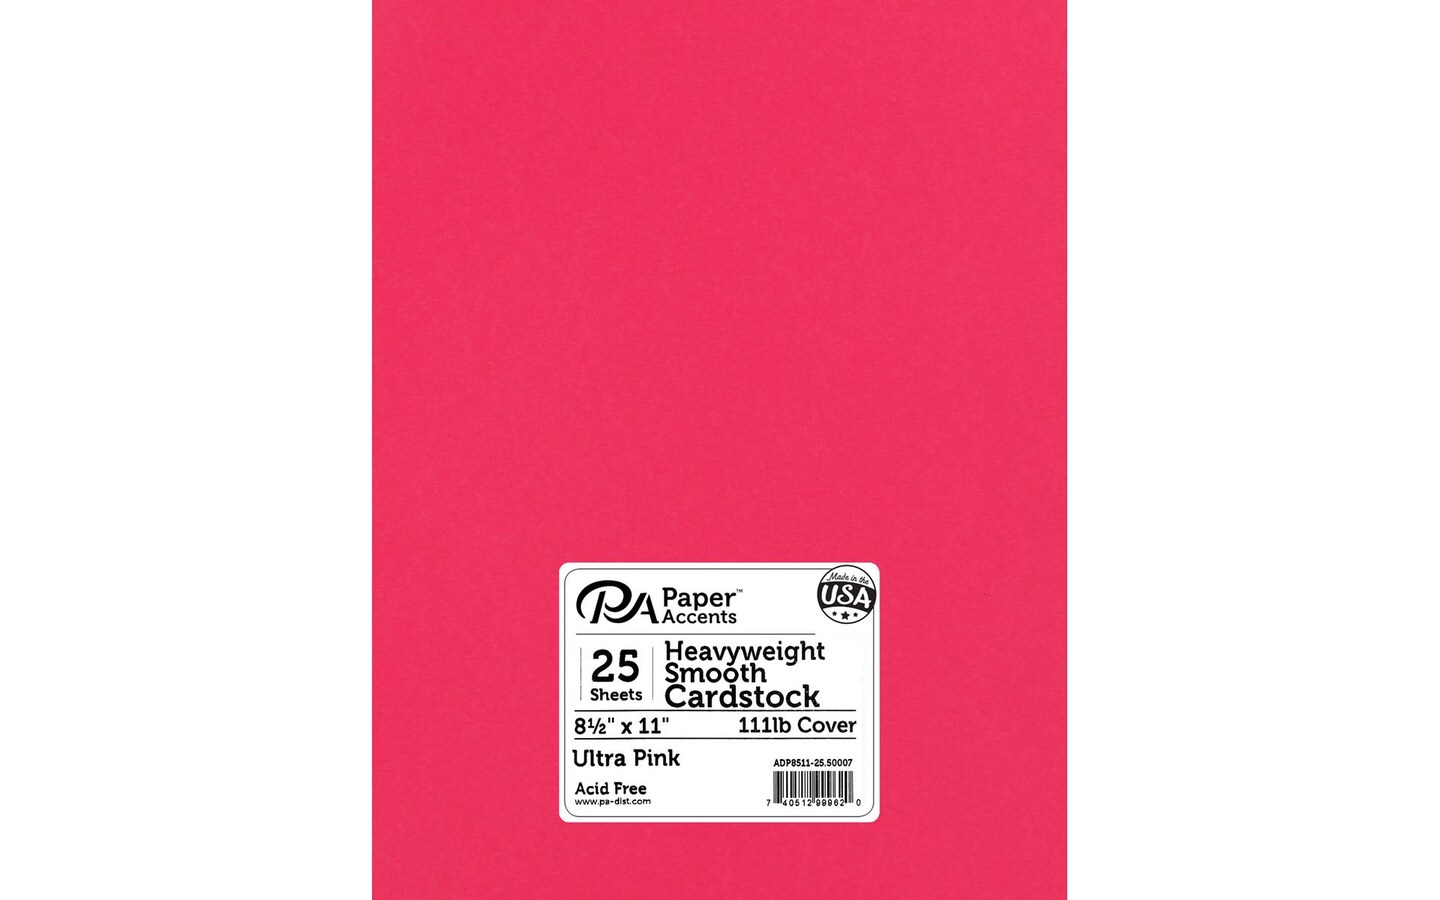 PA Paper Accents Heavyweight Smooth Cardstock 8.5 x 11 Ultra